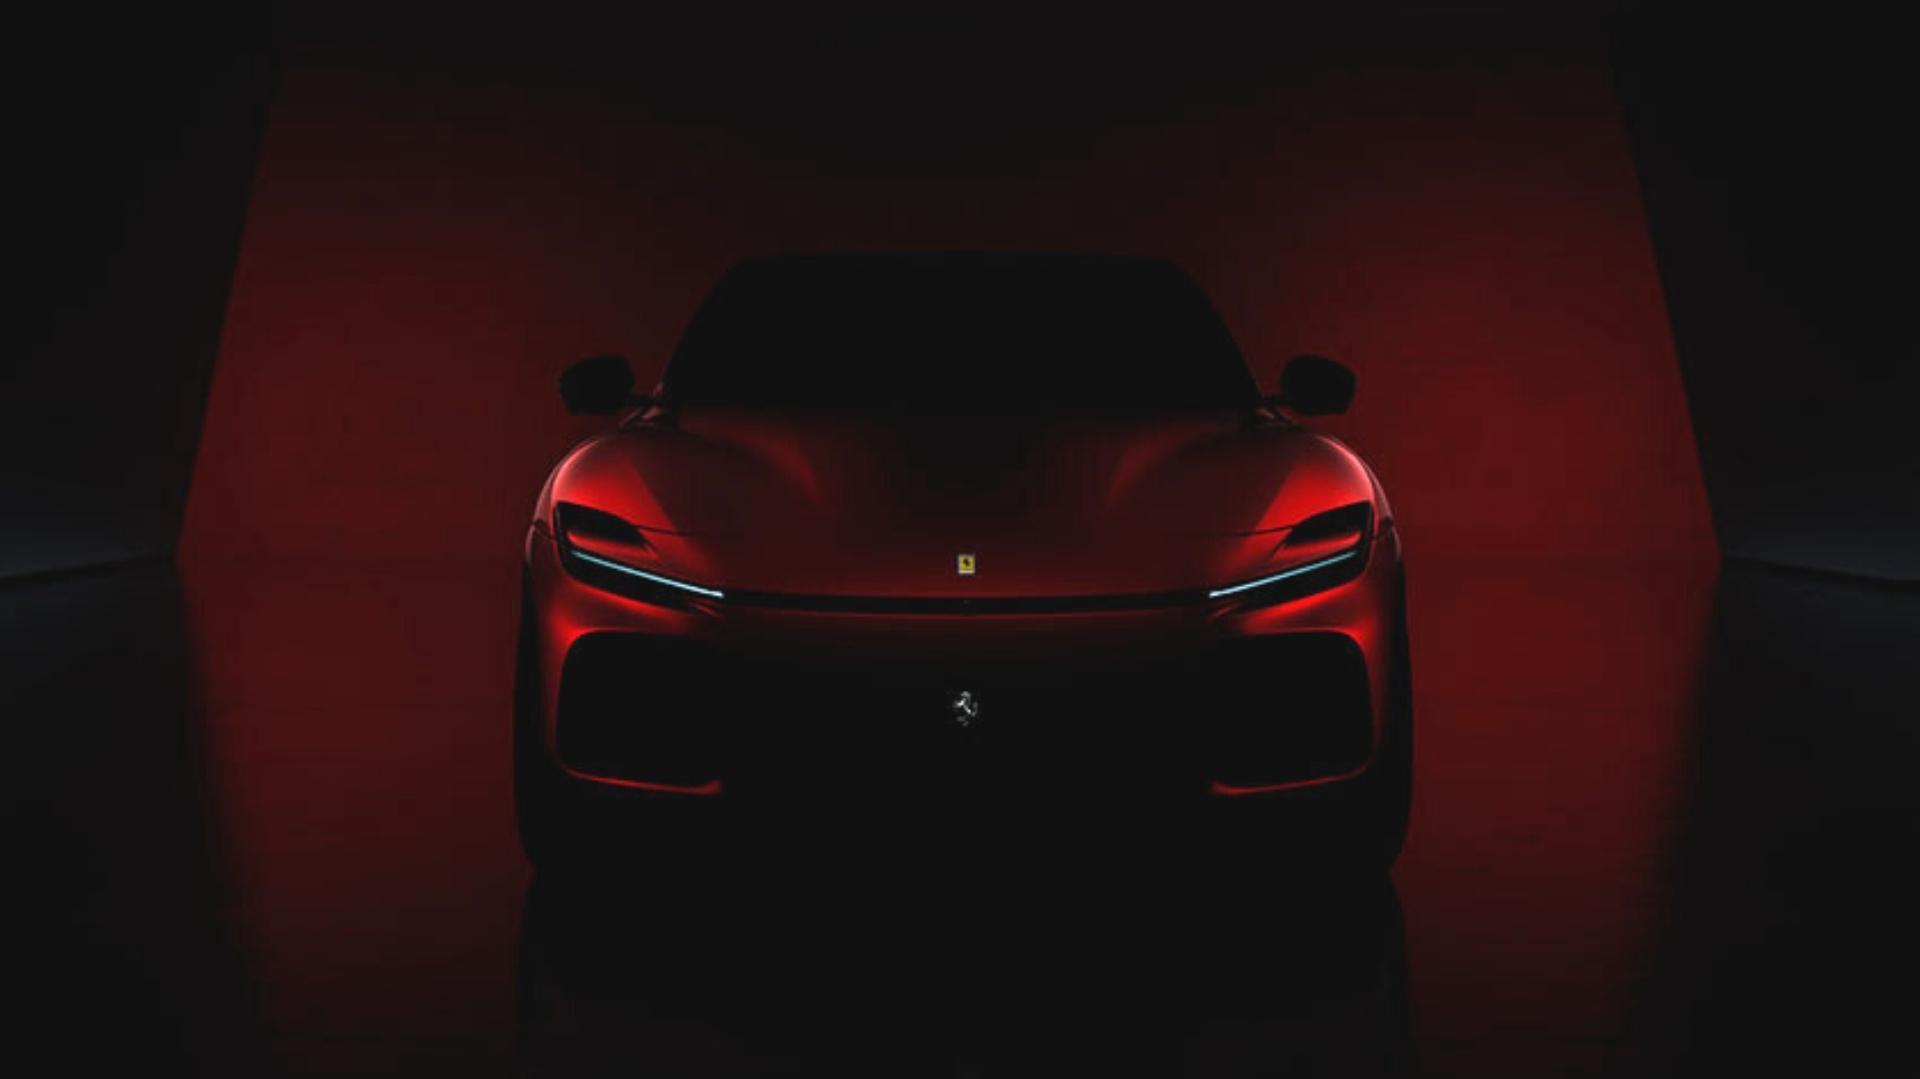 The Ferrari Suv Is A Real Thing Indigo Auto Group